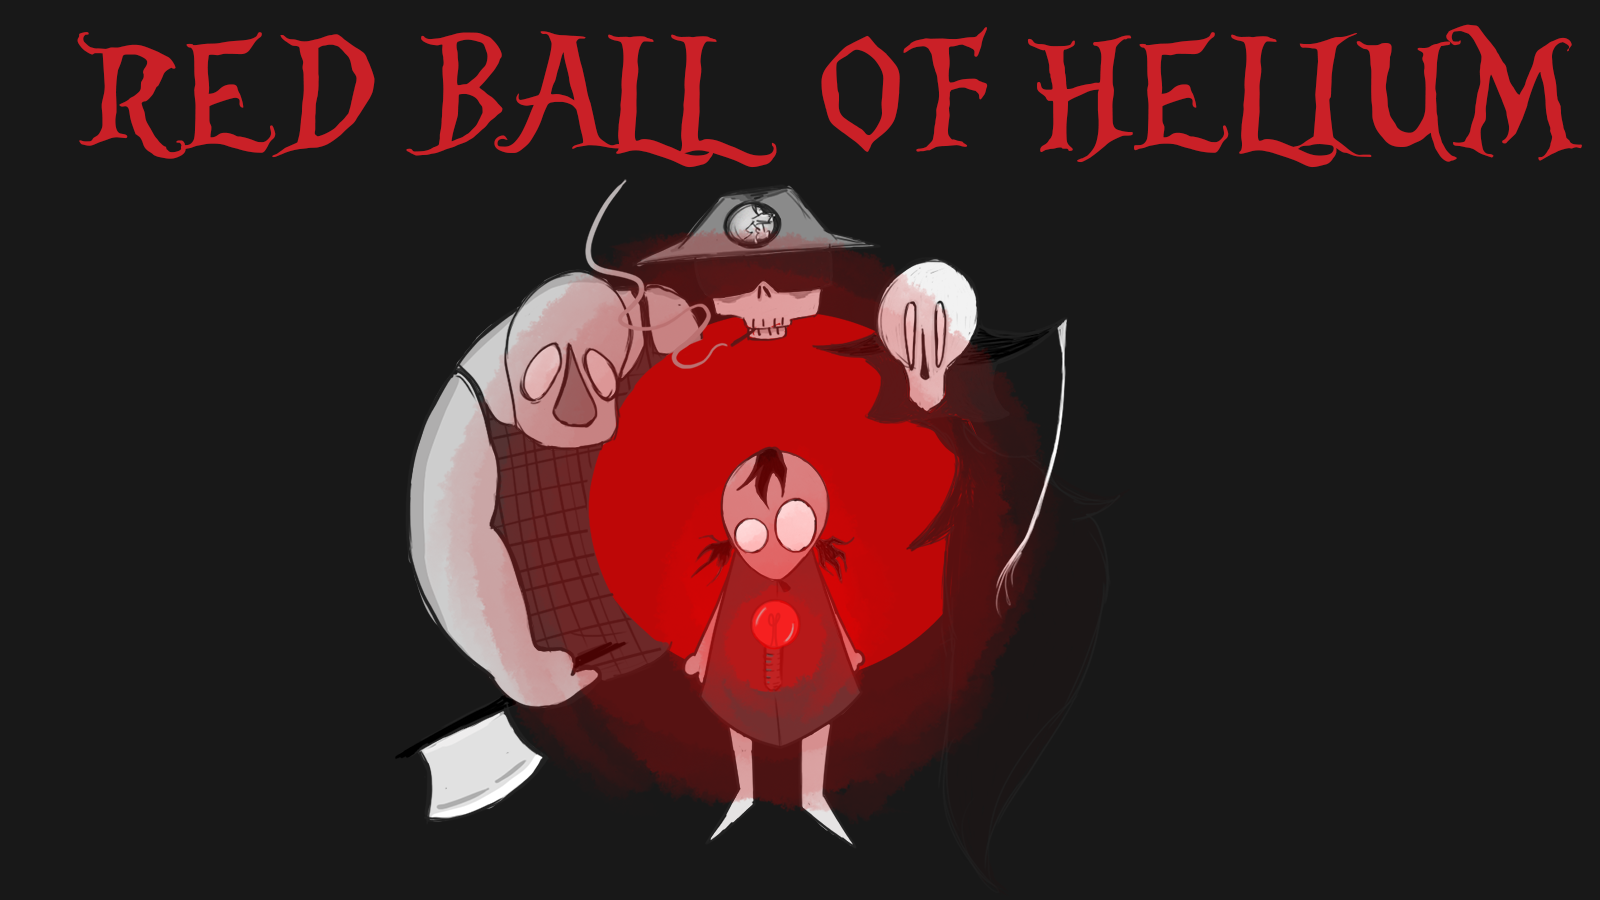 Red ball of helium